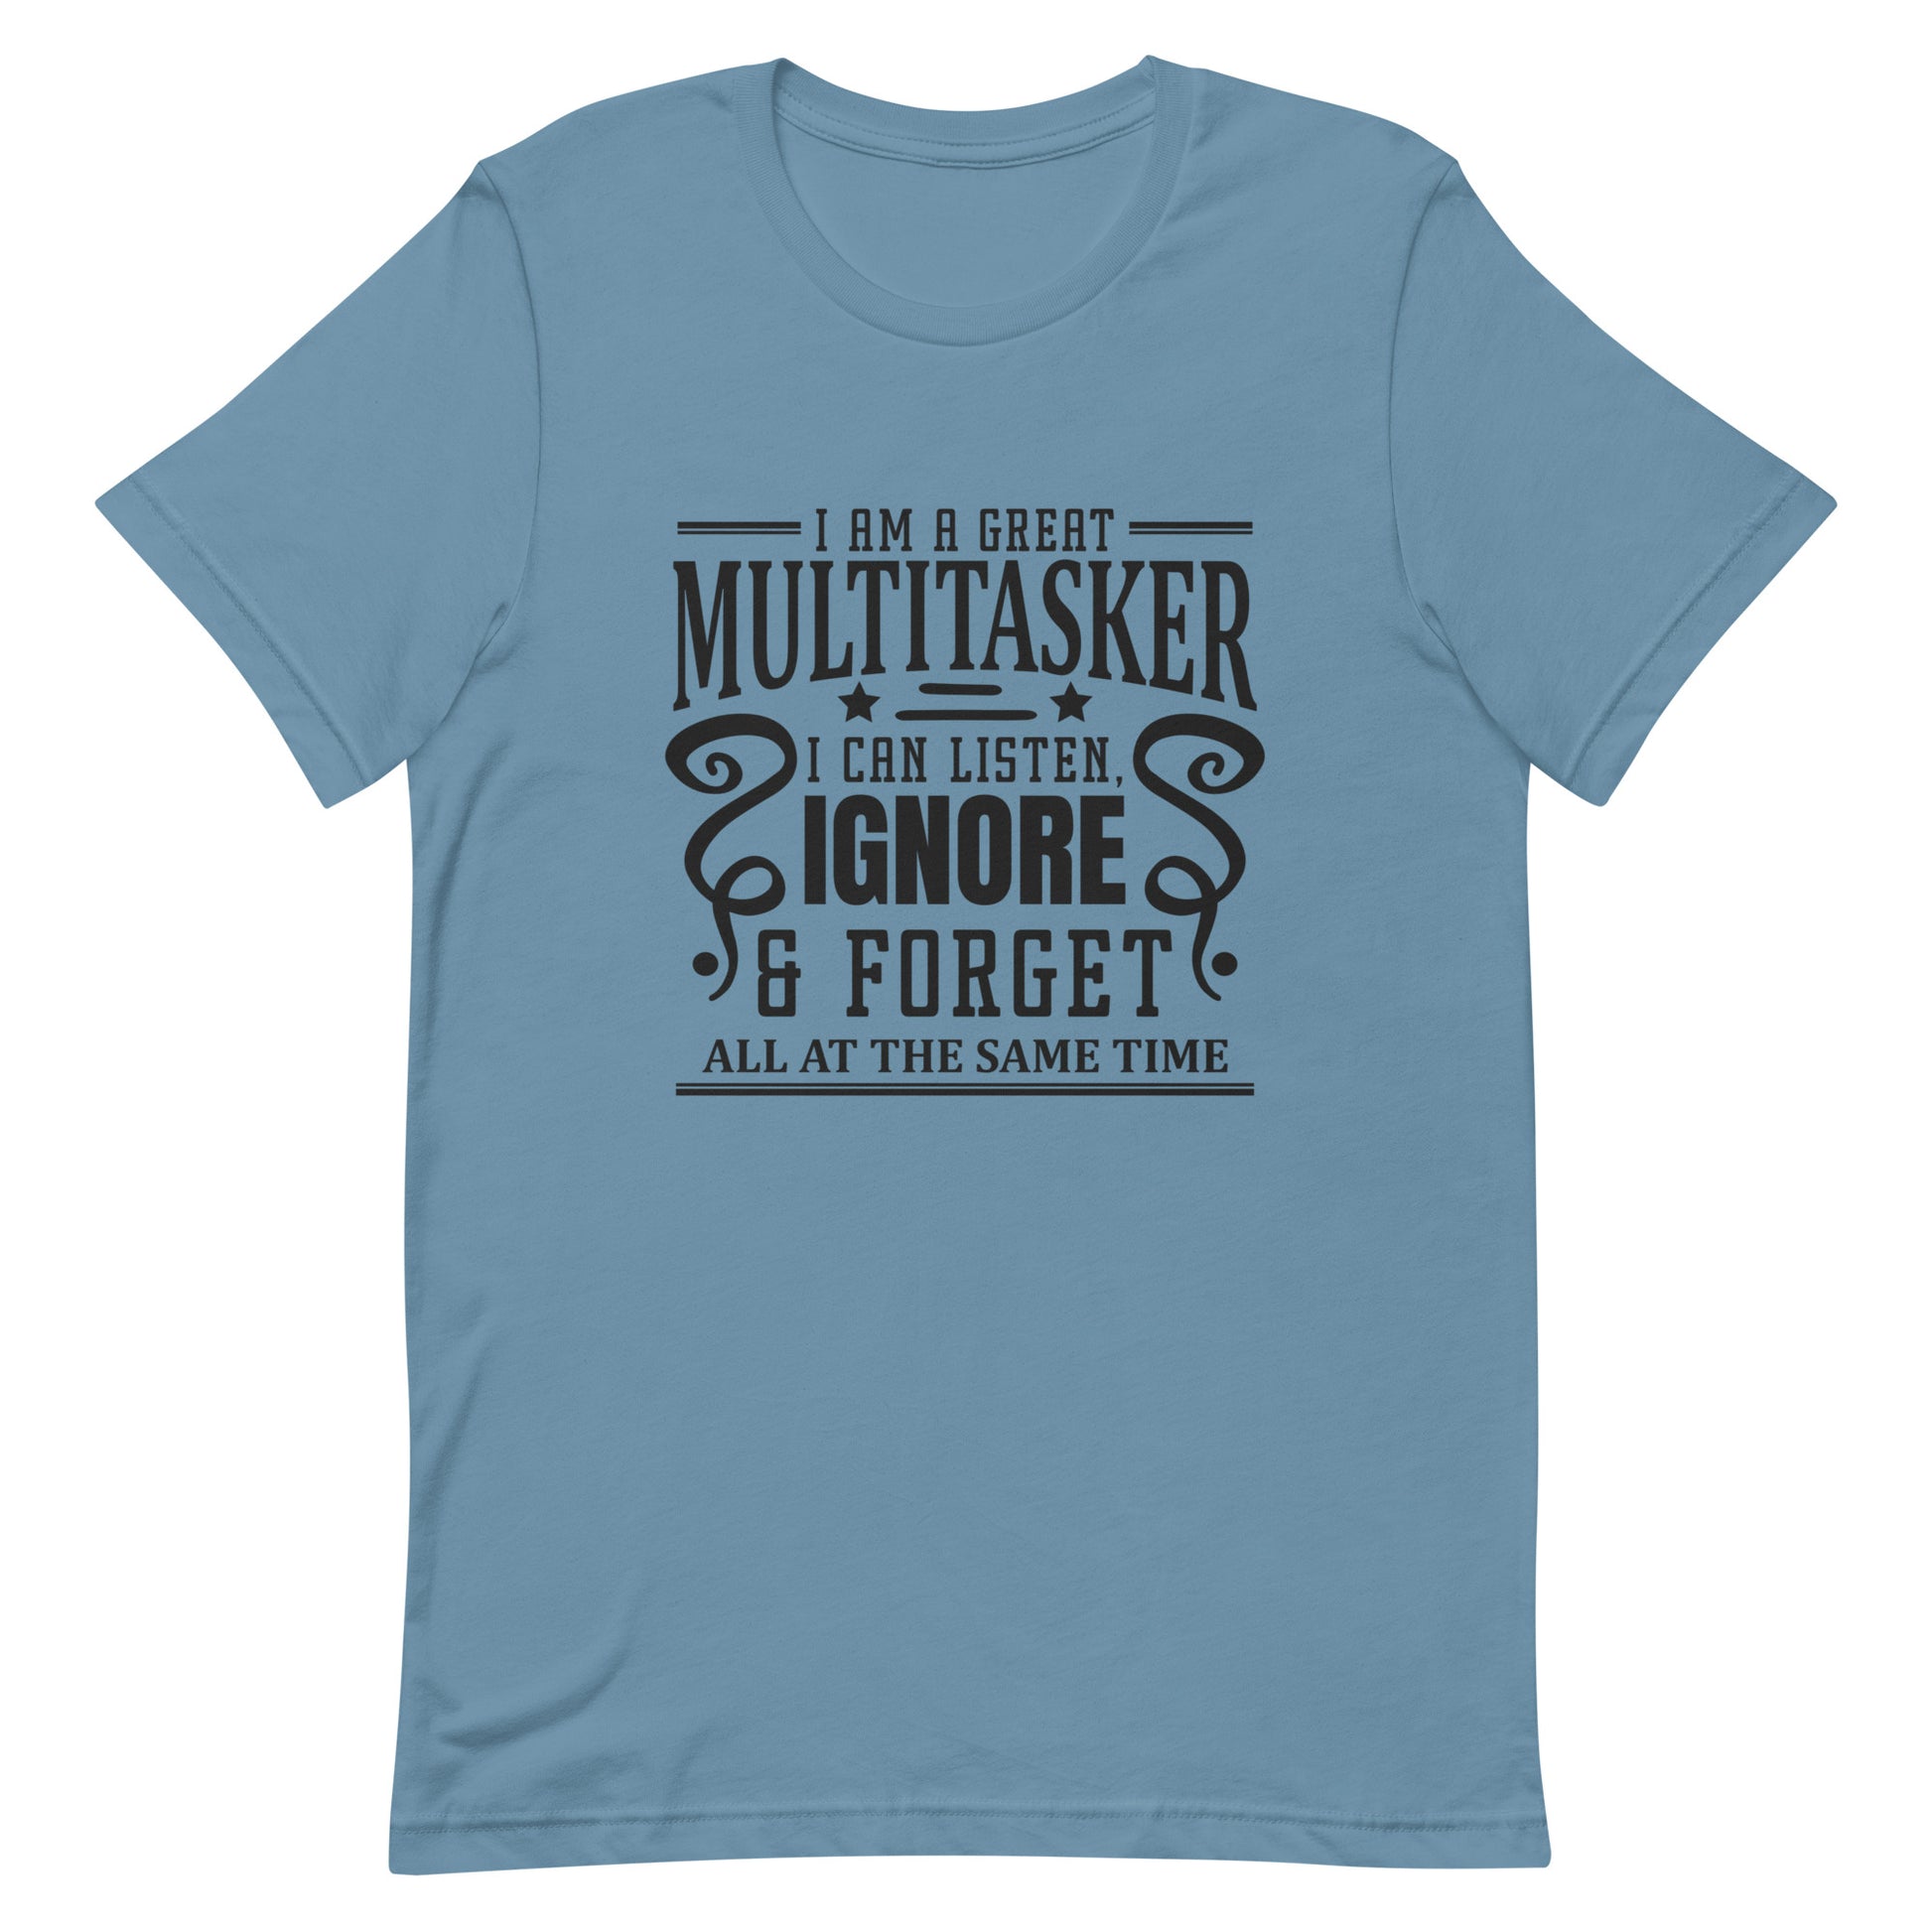 I am a Great Multitasker I Can Listen Ignore & Forget All at the Same Time Unisex T-shirt